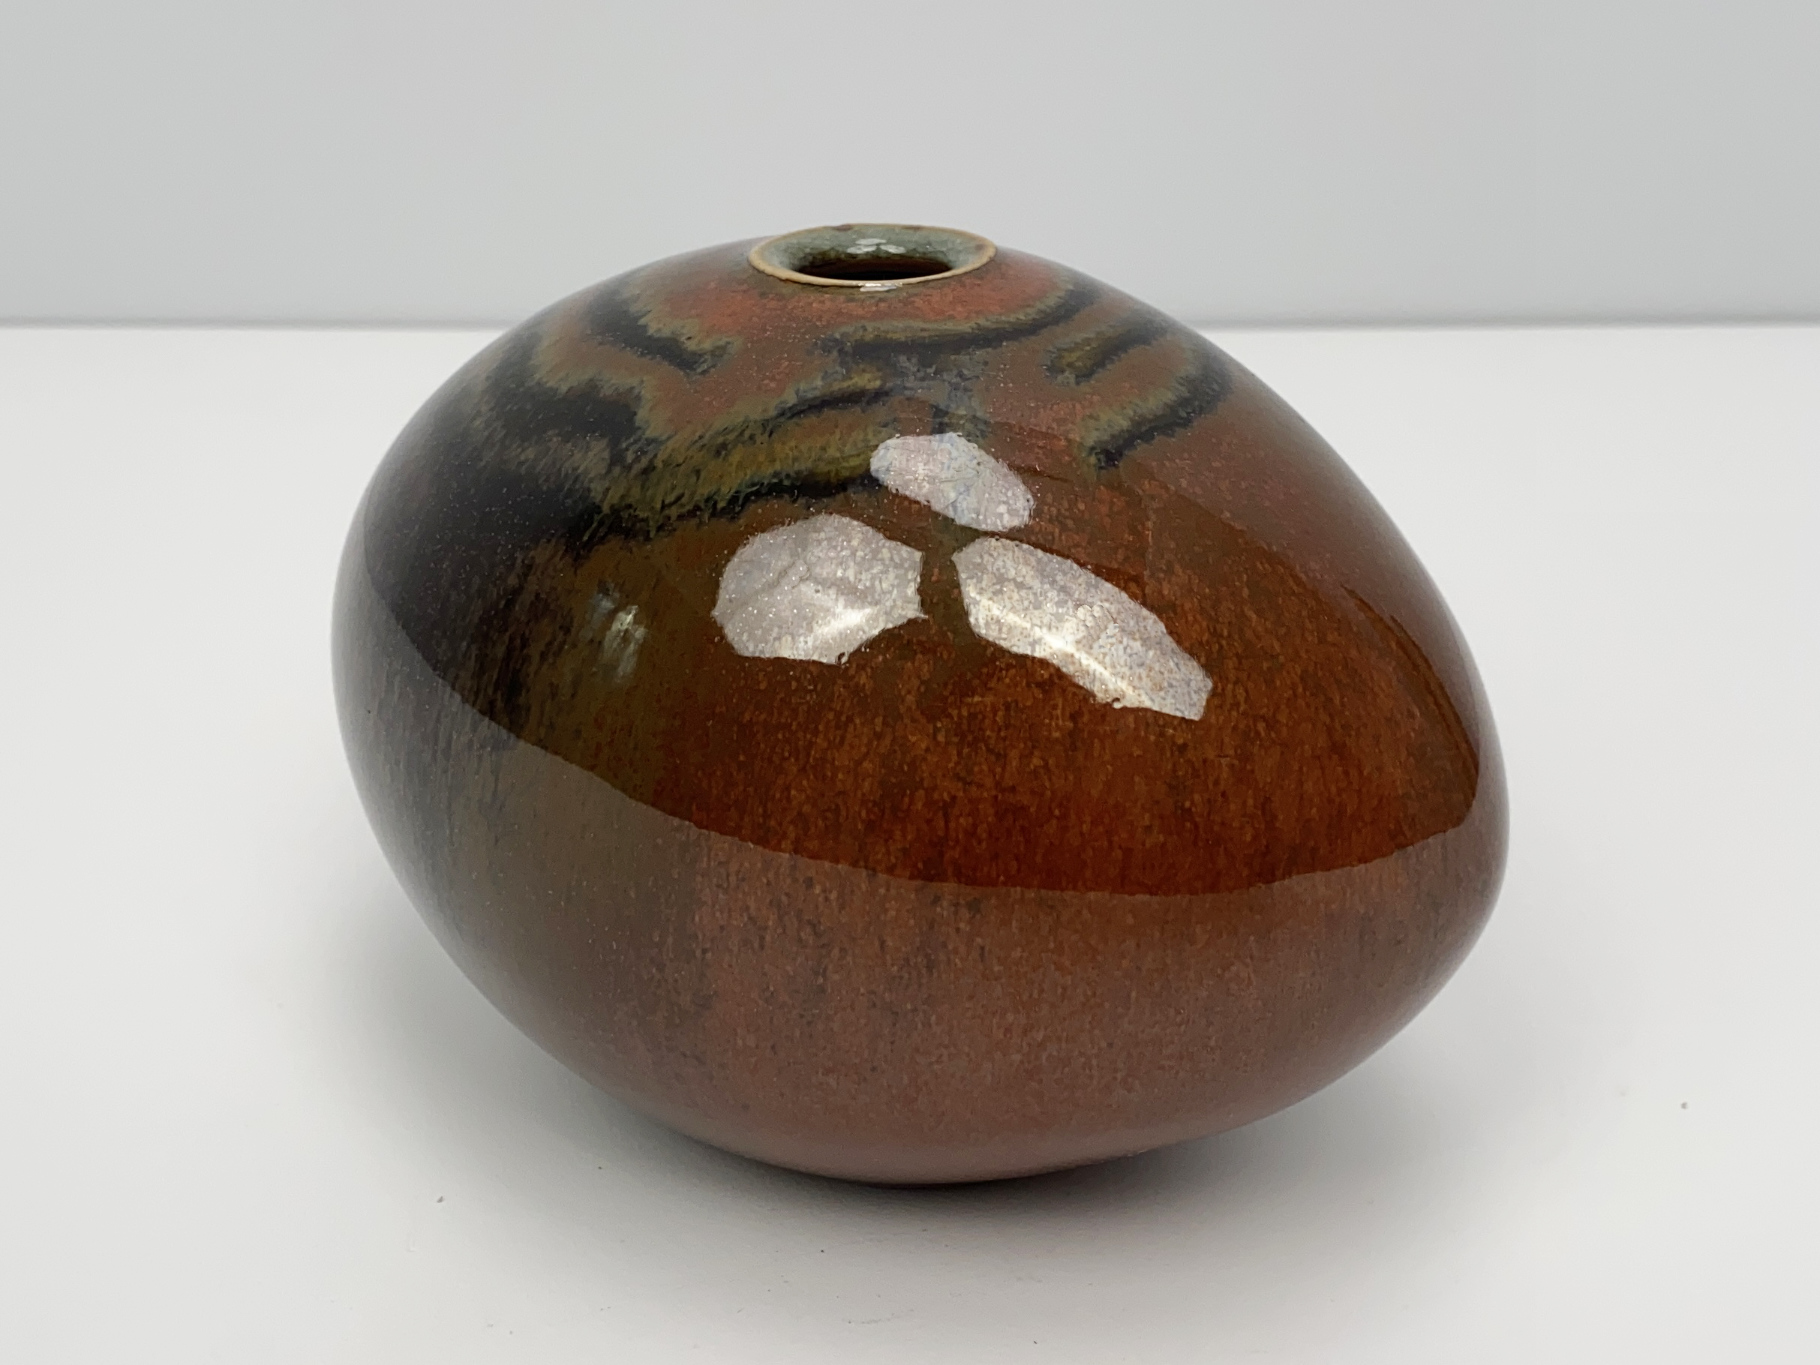 Vase, Ceramic, Stoneware, Unique Piece, black Iron Glaze, over it Wax Painting covered with Persimmon Glaze, by Wilhelm & Elly Kuch, 1980s